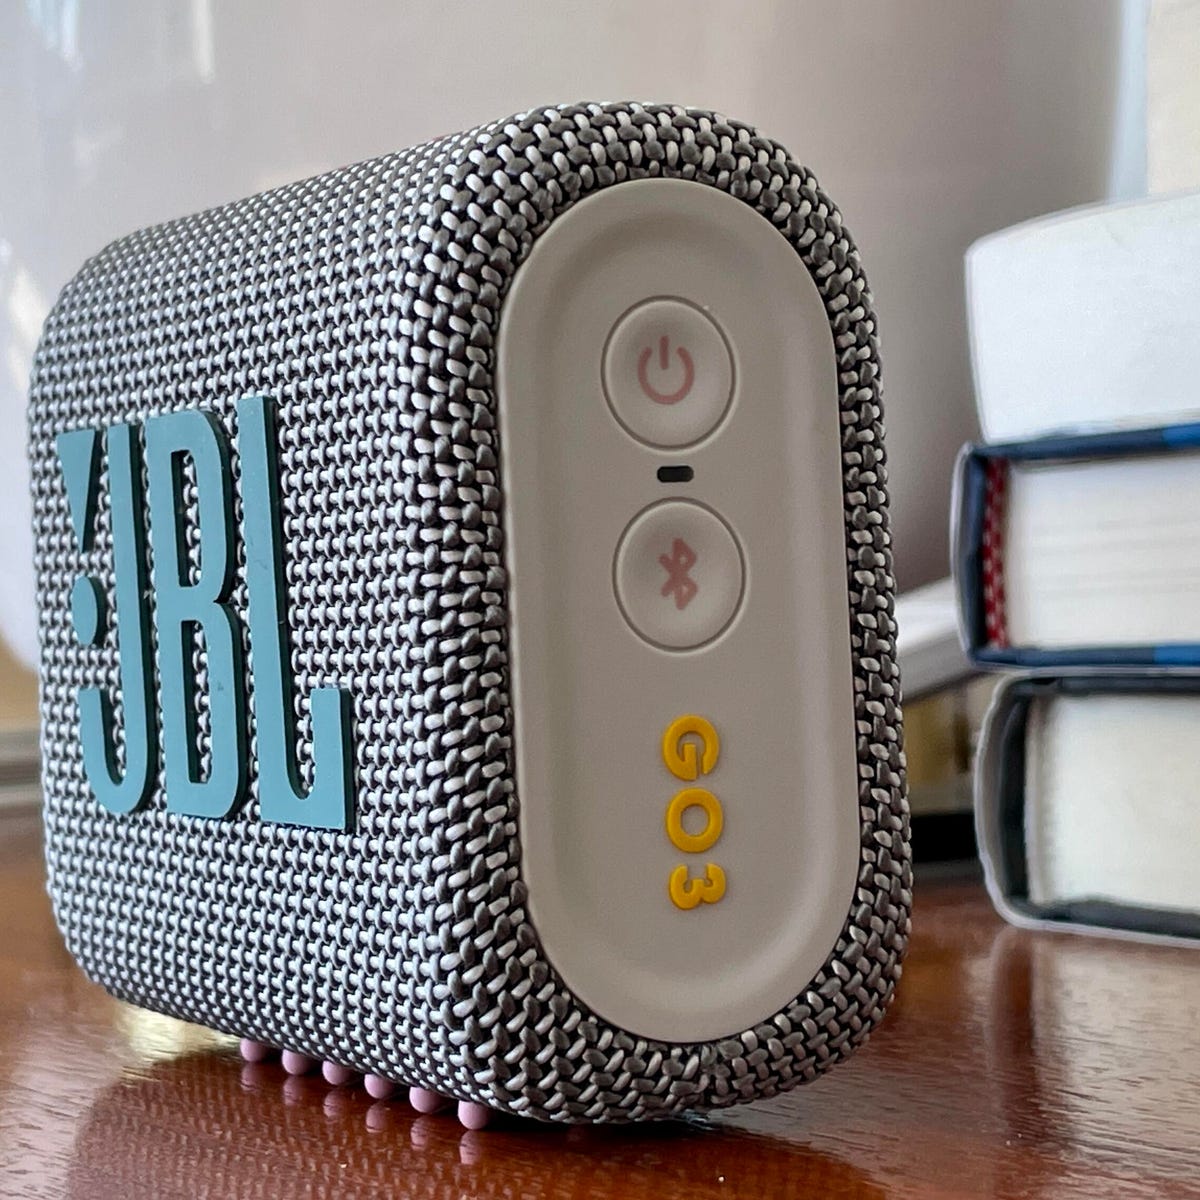 JBL Go 3 review: Tiny $40 Bluetooth speaker with big improvements - CNET